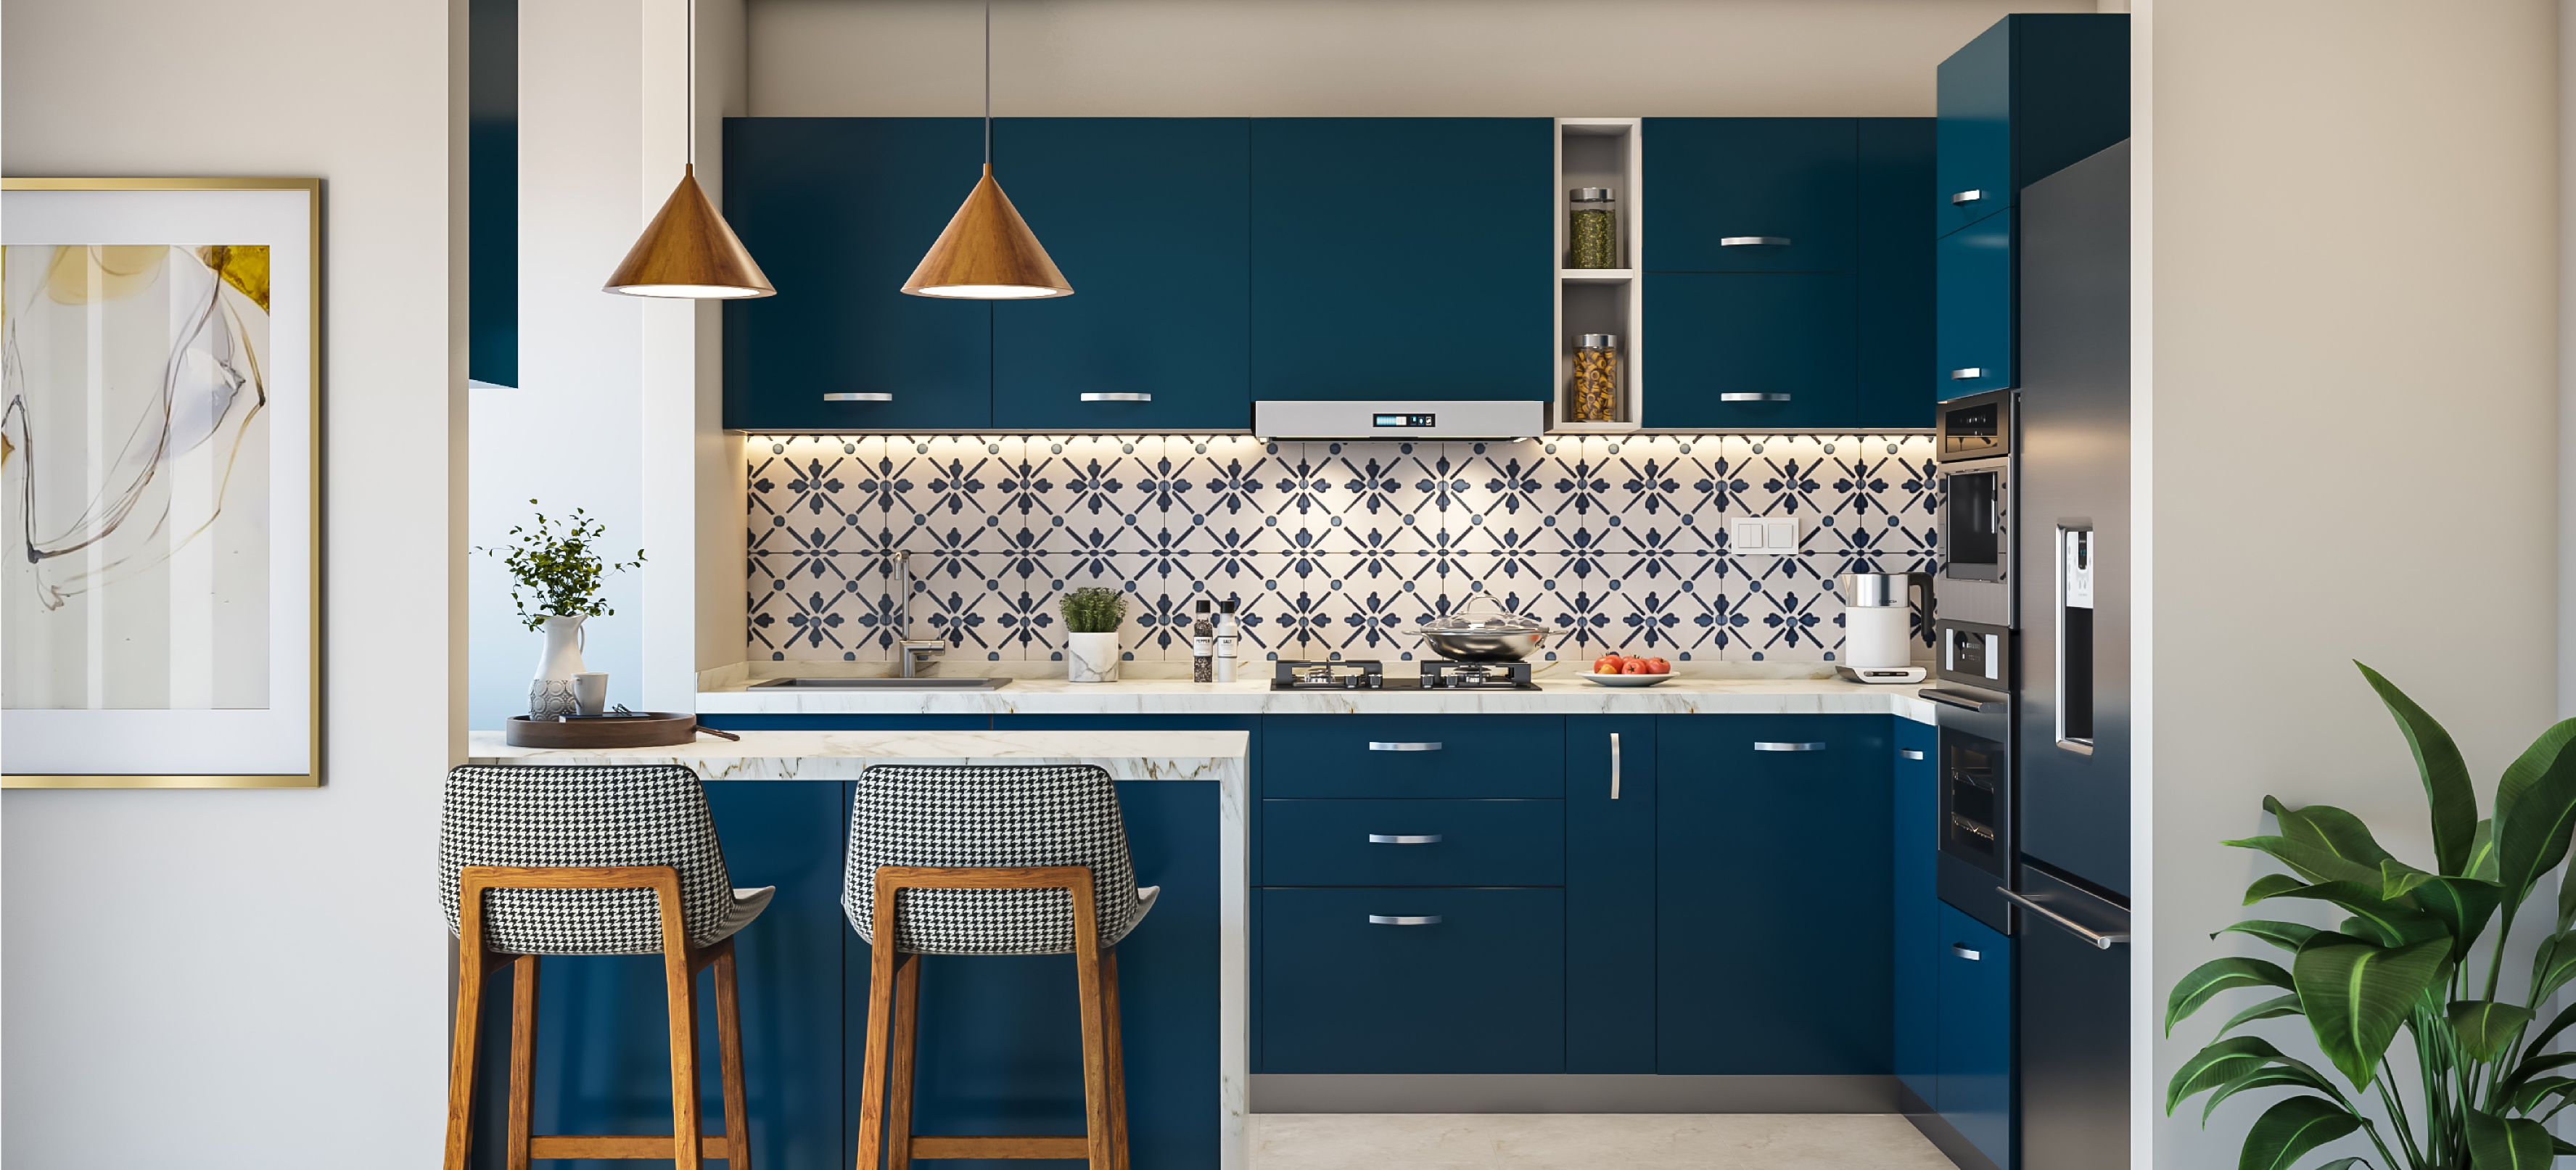 How to Choose the Right Modular Kitchen design which suits you